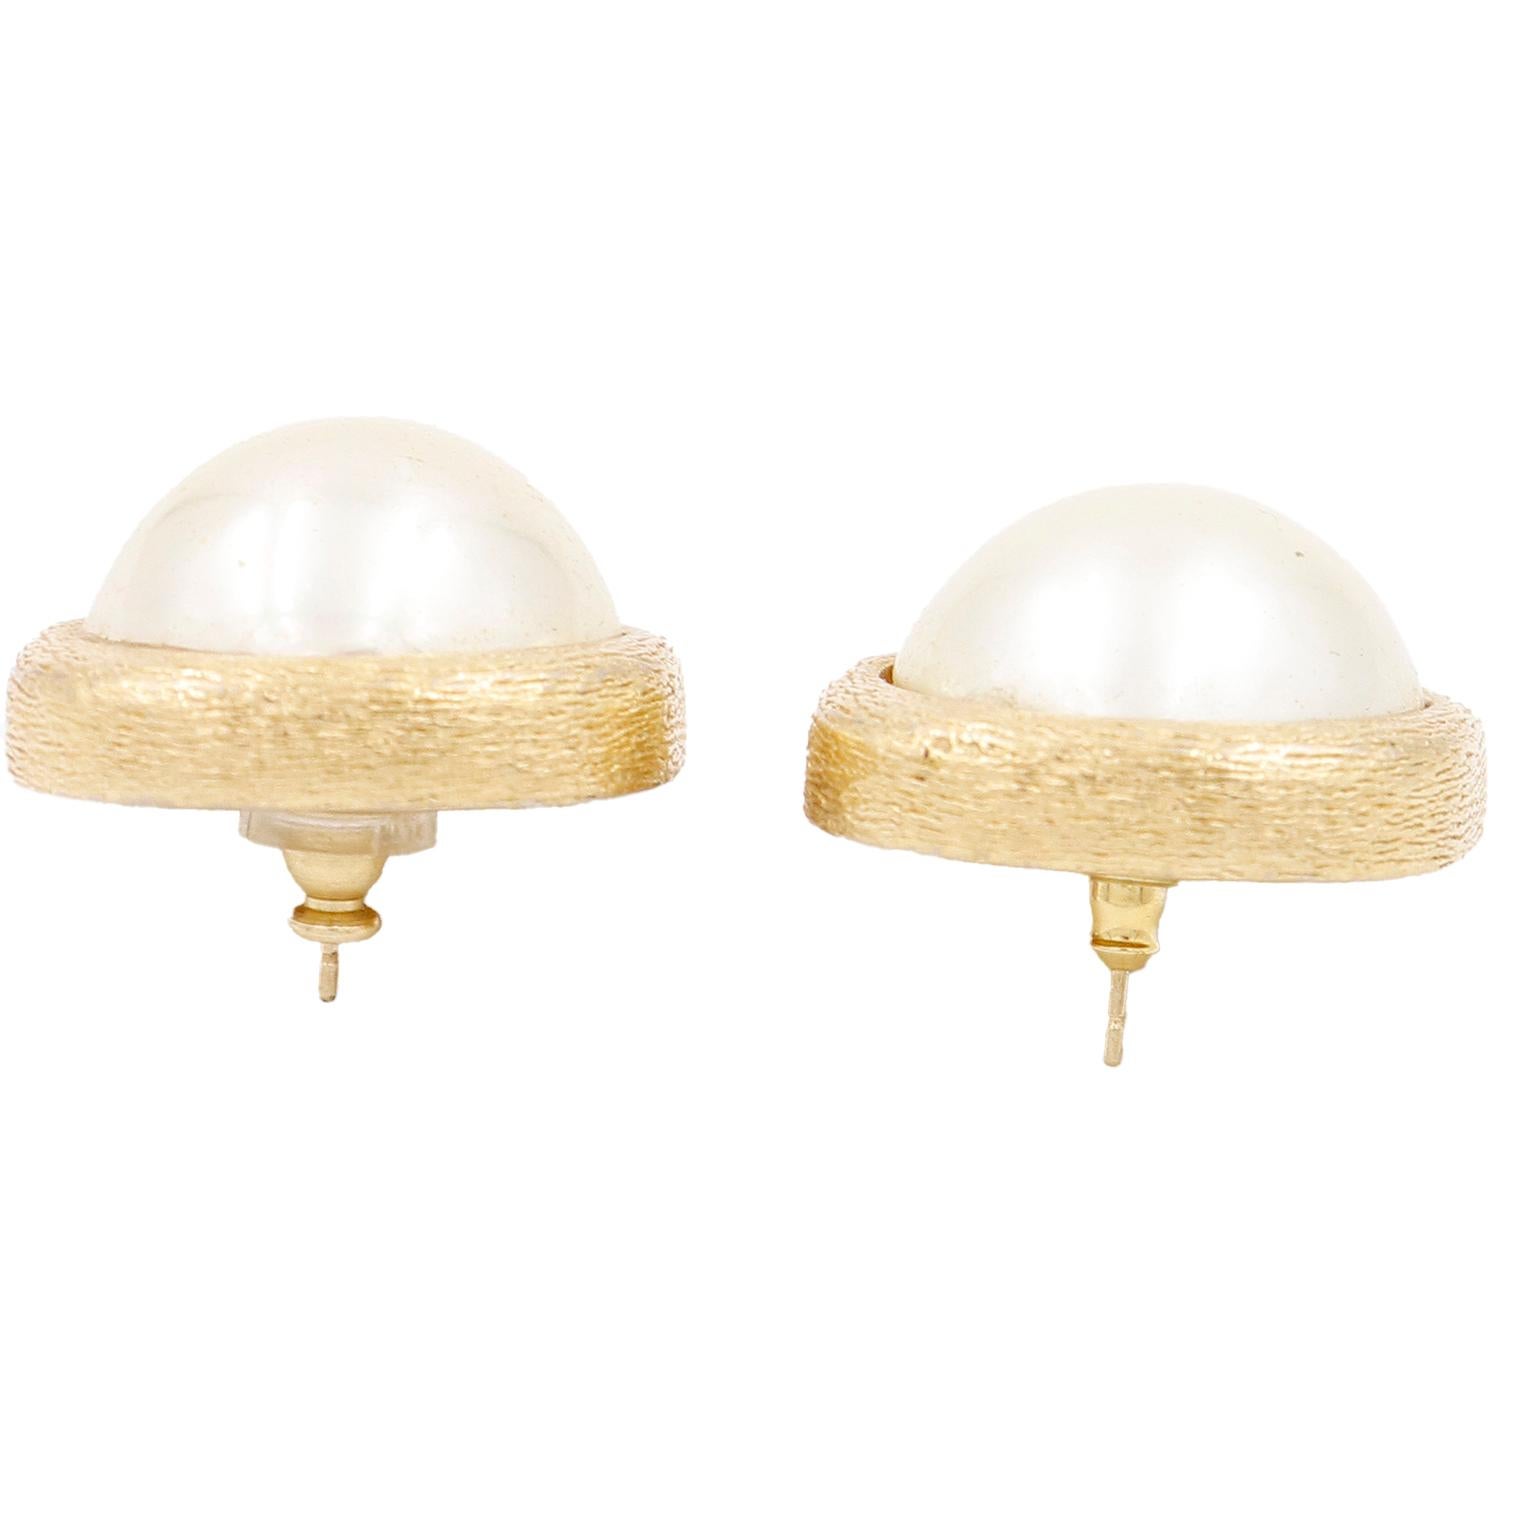 Christian Dior Vintage Square Textured Gold Pierced Earrings w Oversized Pearl In Excellent Condition For Sale In Portland, OR